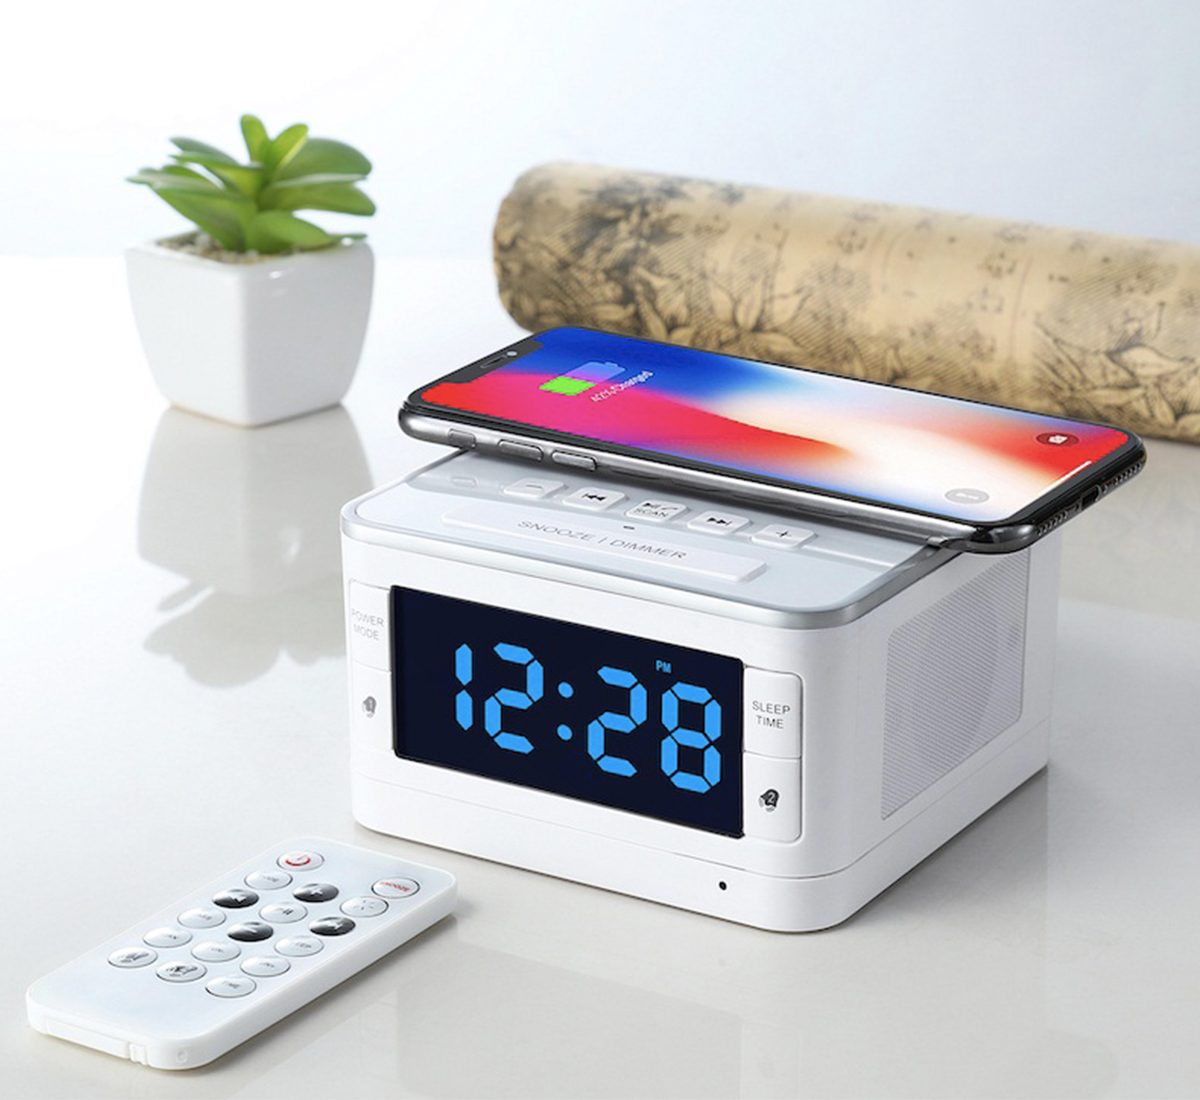 White ABS dock station with LED display